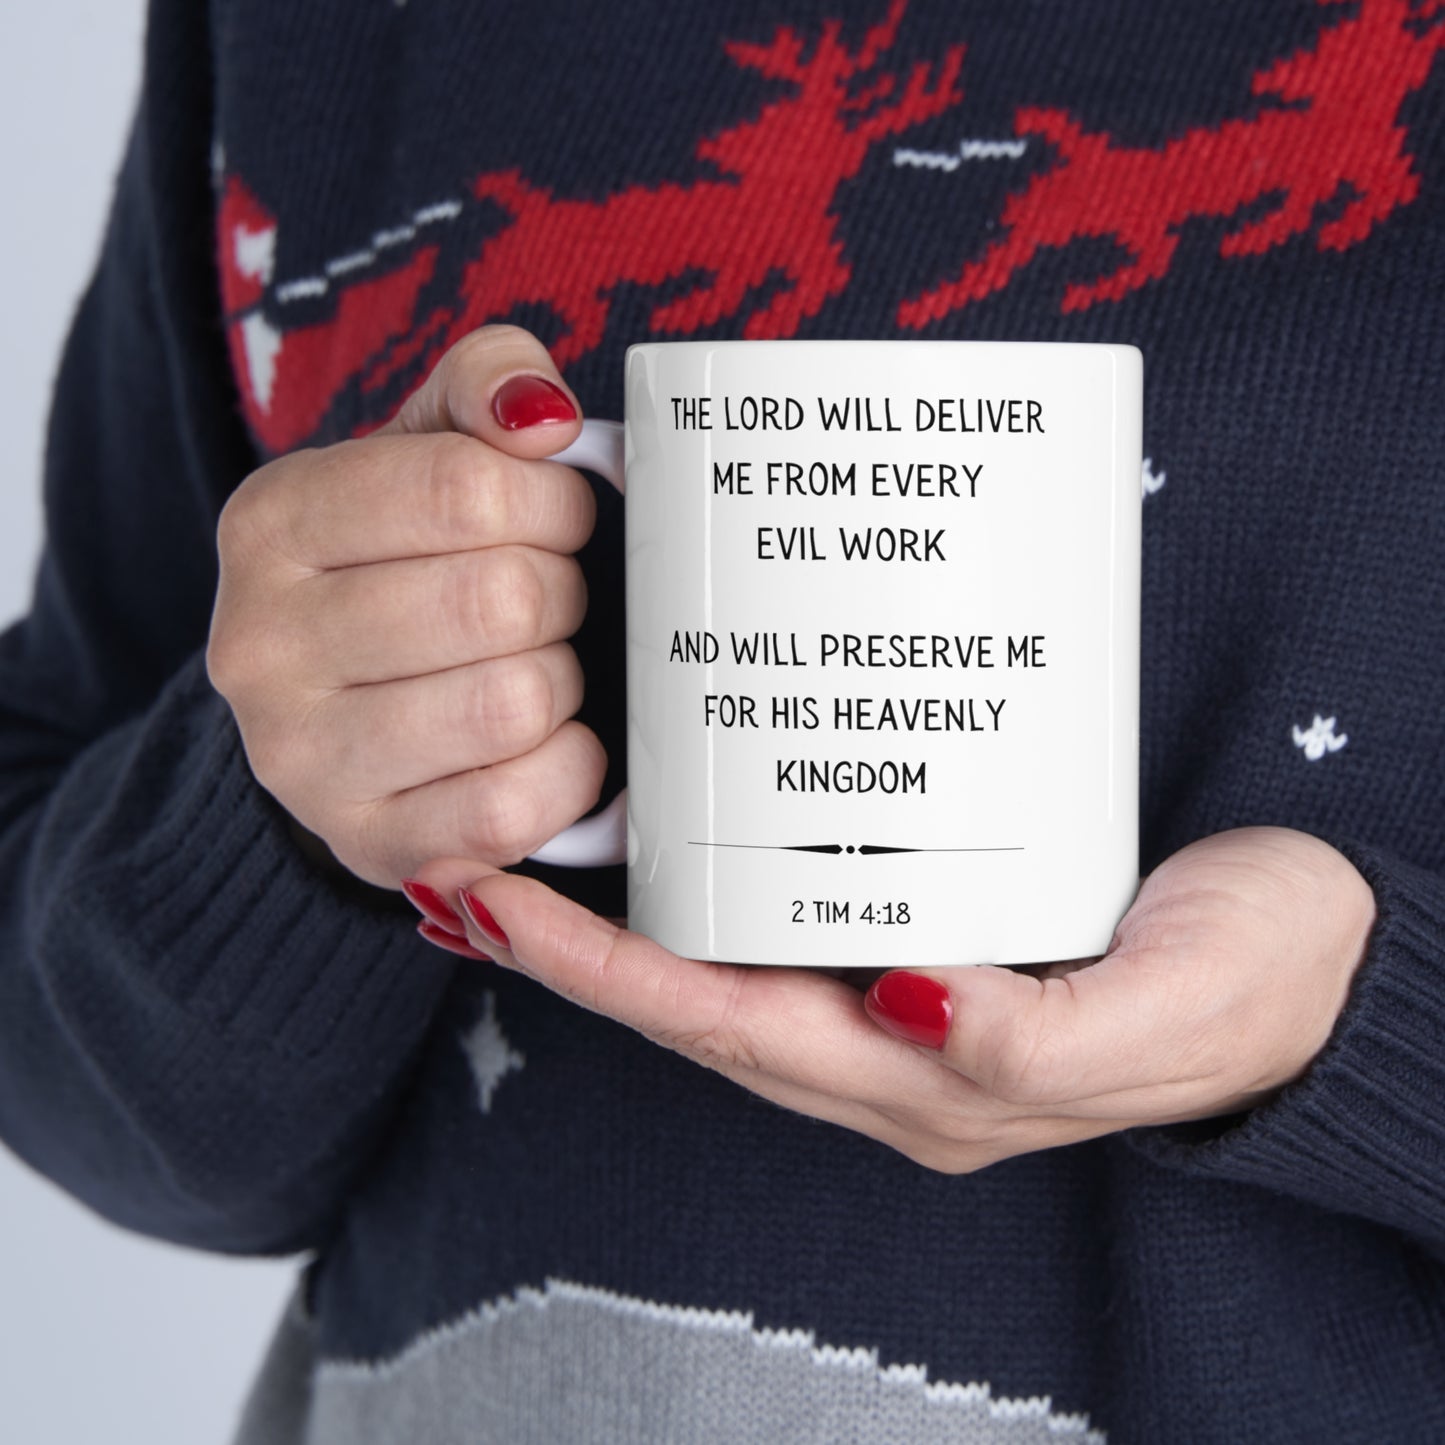 Scripture Mug, The Lord Will Deliver Me, 2 Timothy 4:18